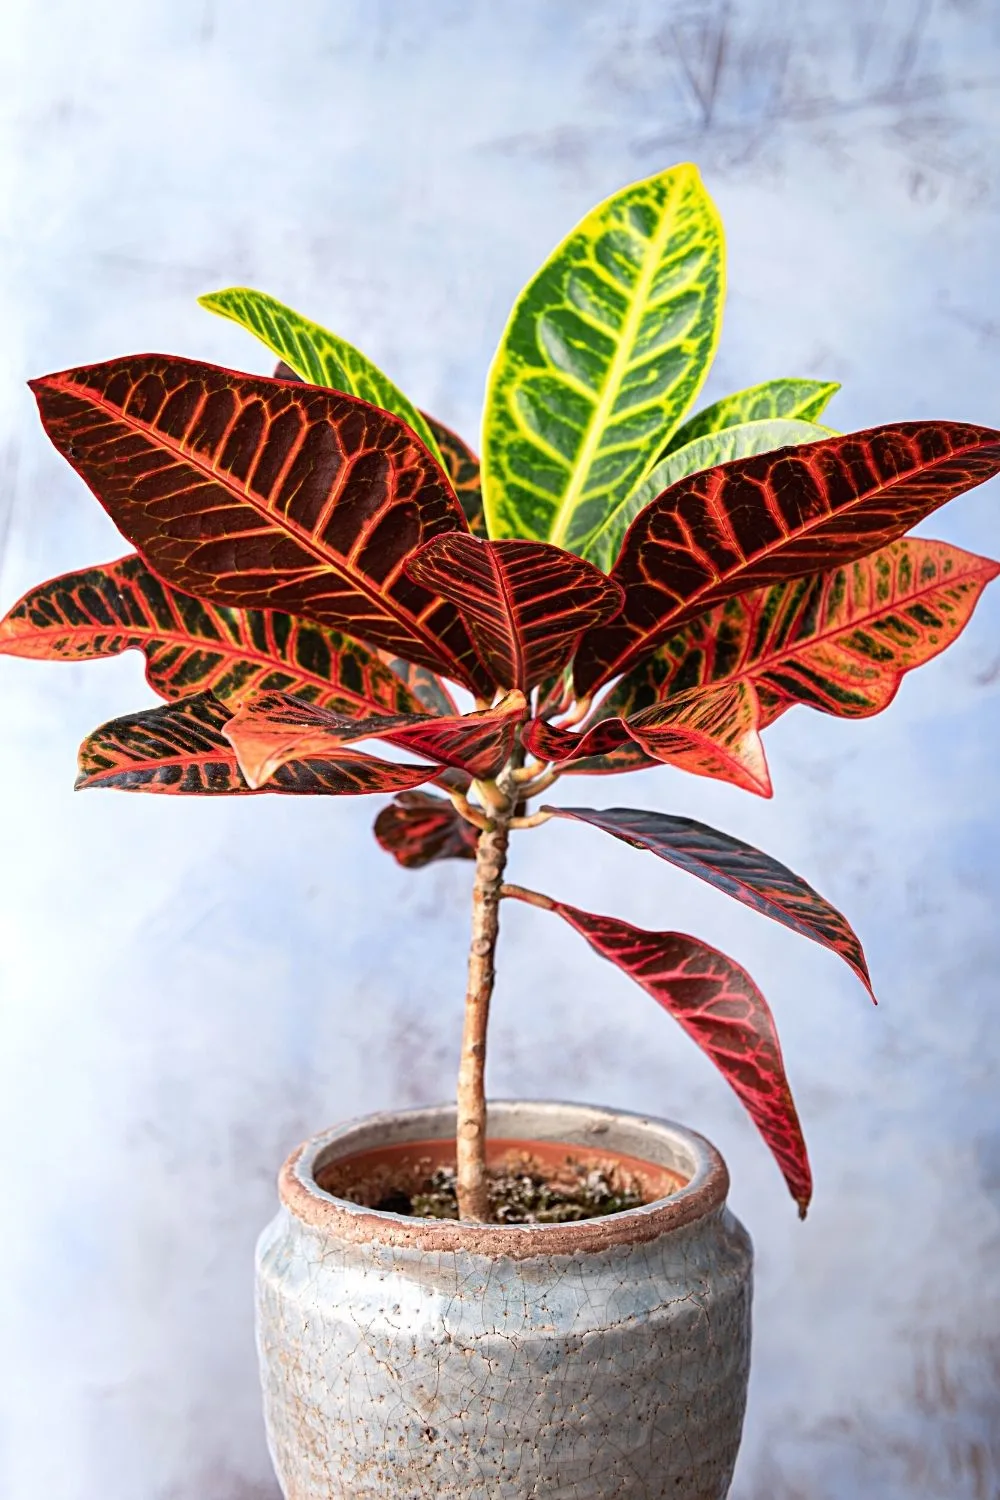 Croton is one of the plants that's good as decor for homes and offices but is hard to grow